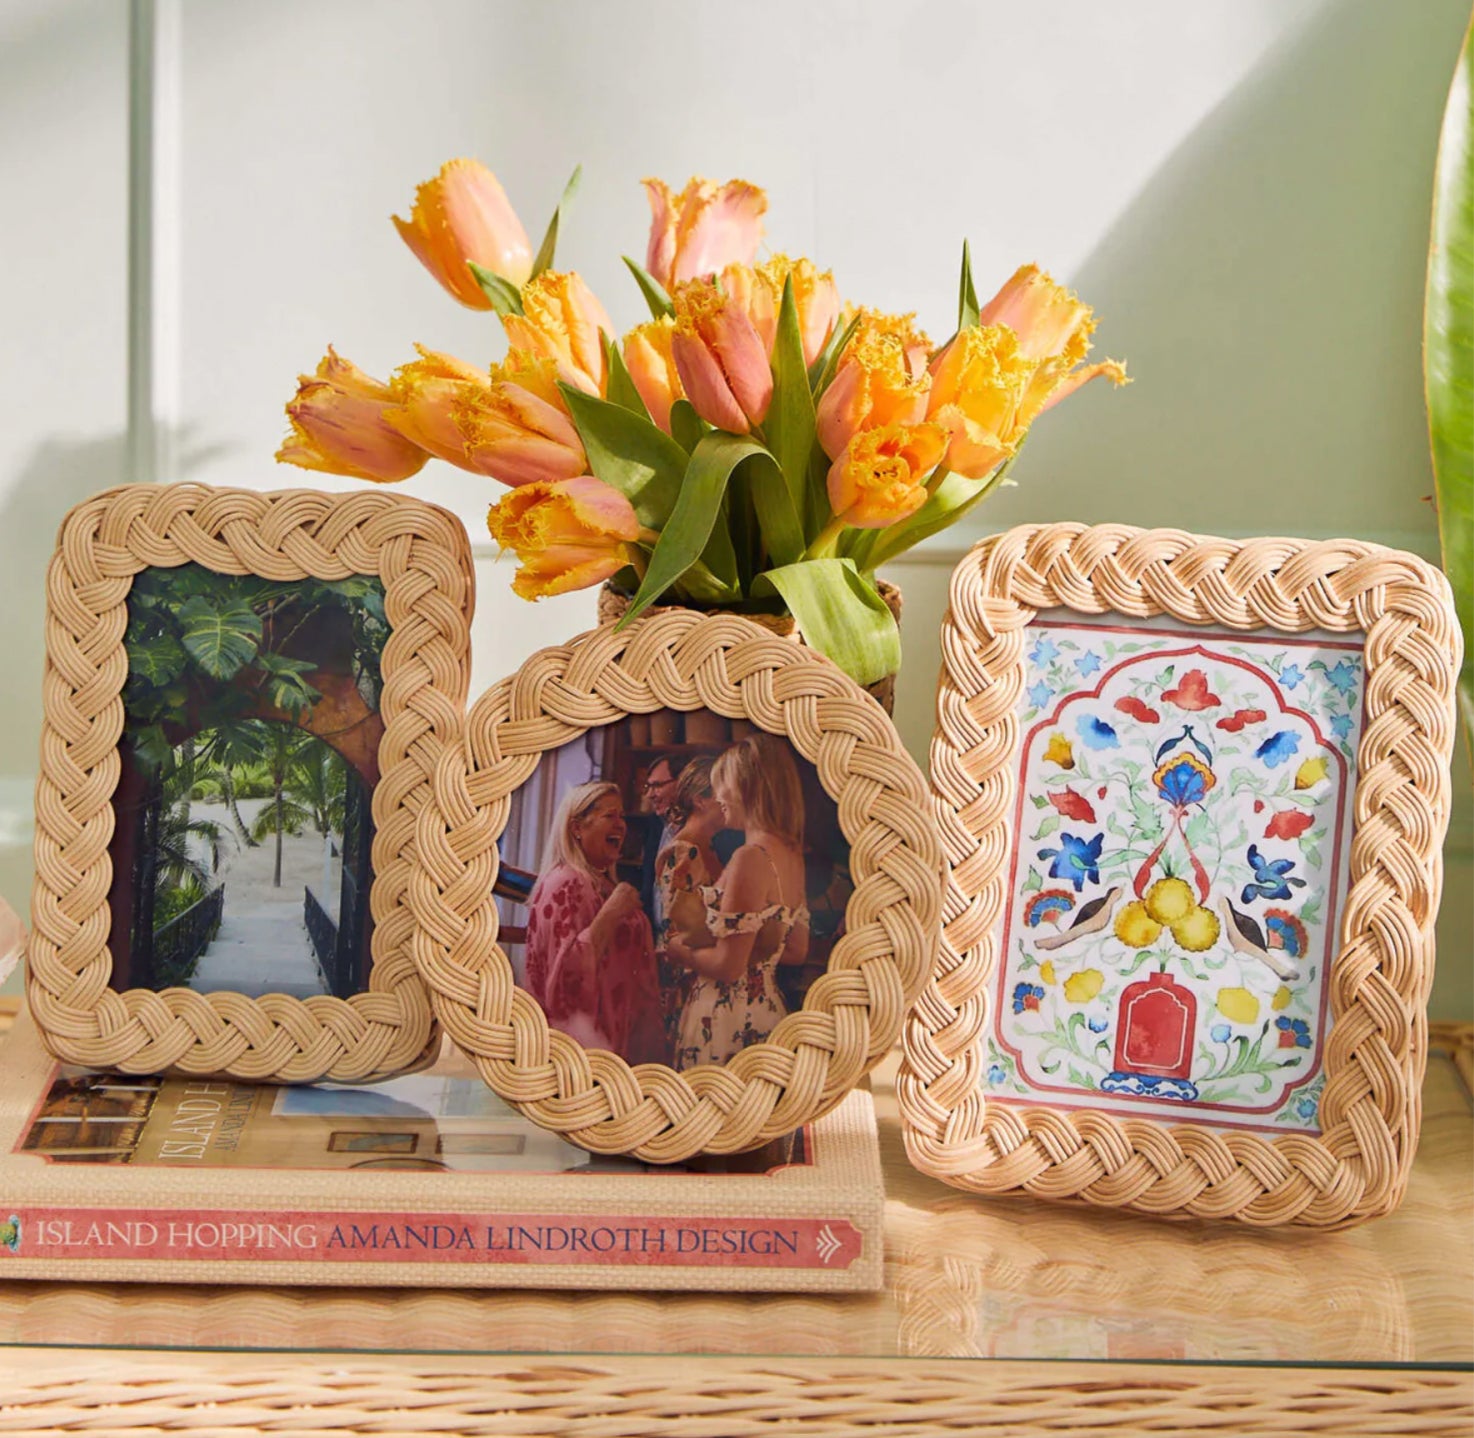 Braided Picture Frame Round 5'